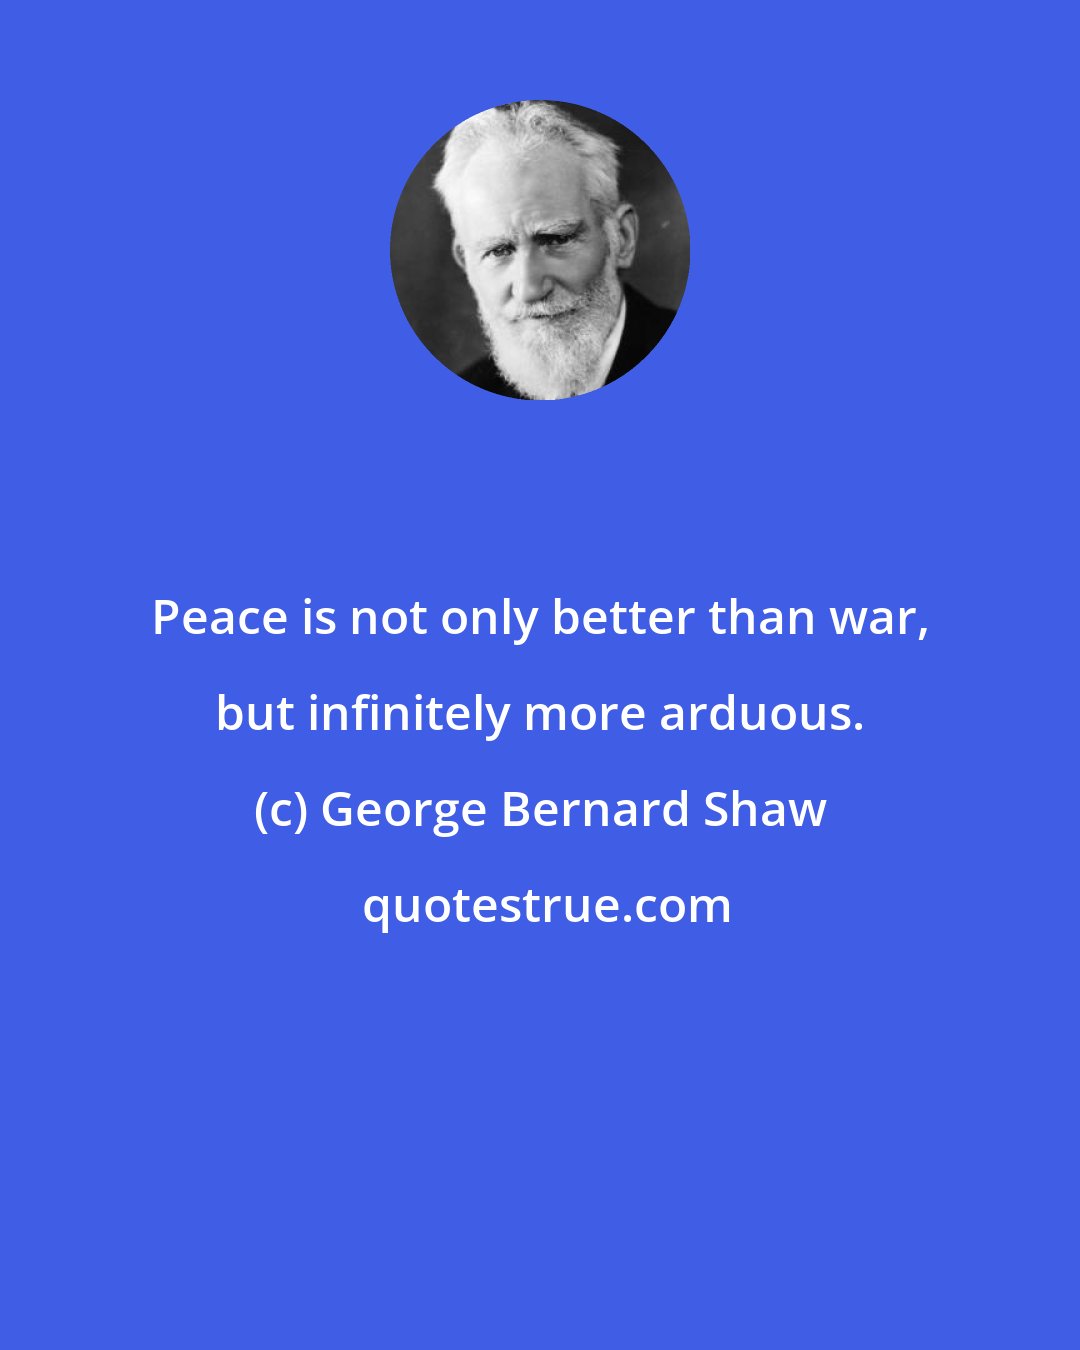 George Bernard Shaw: Peace is not only better than war, but infinitely more arduous.